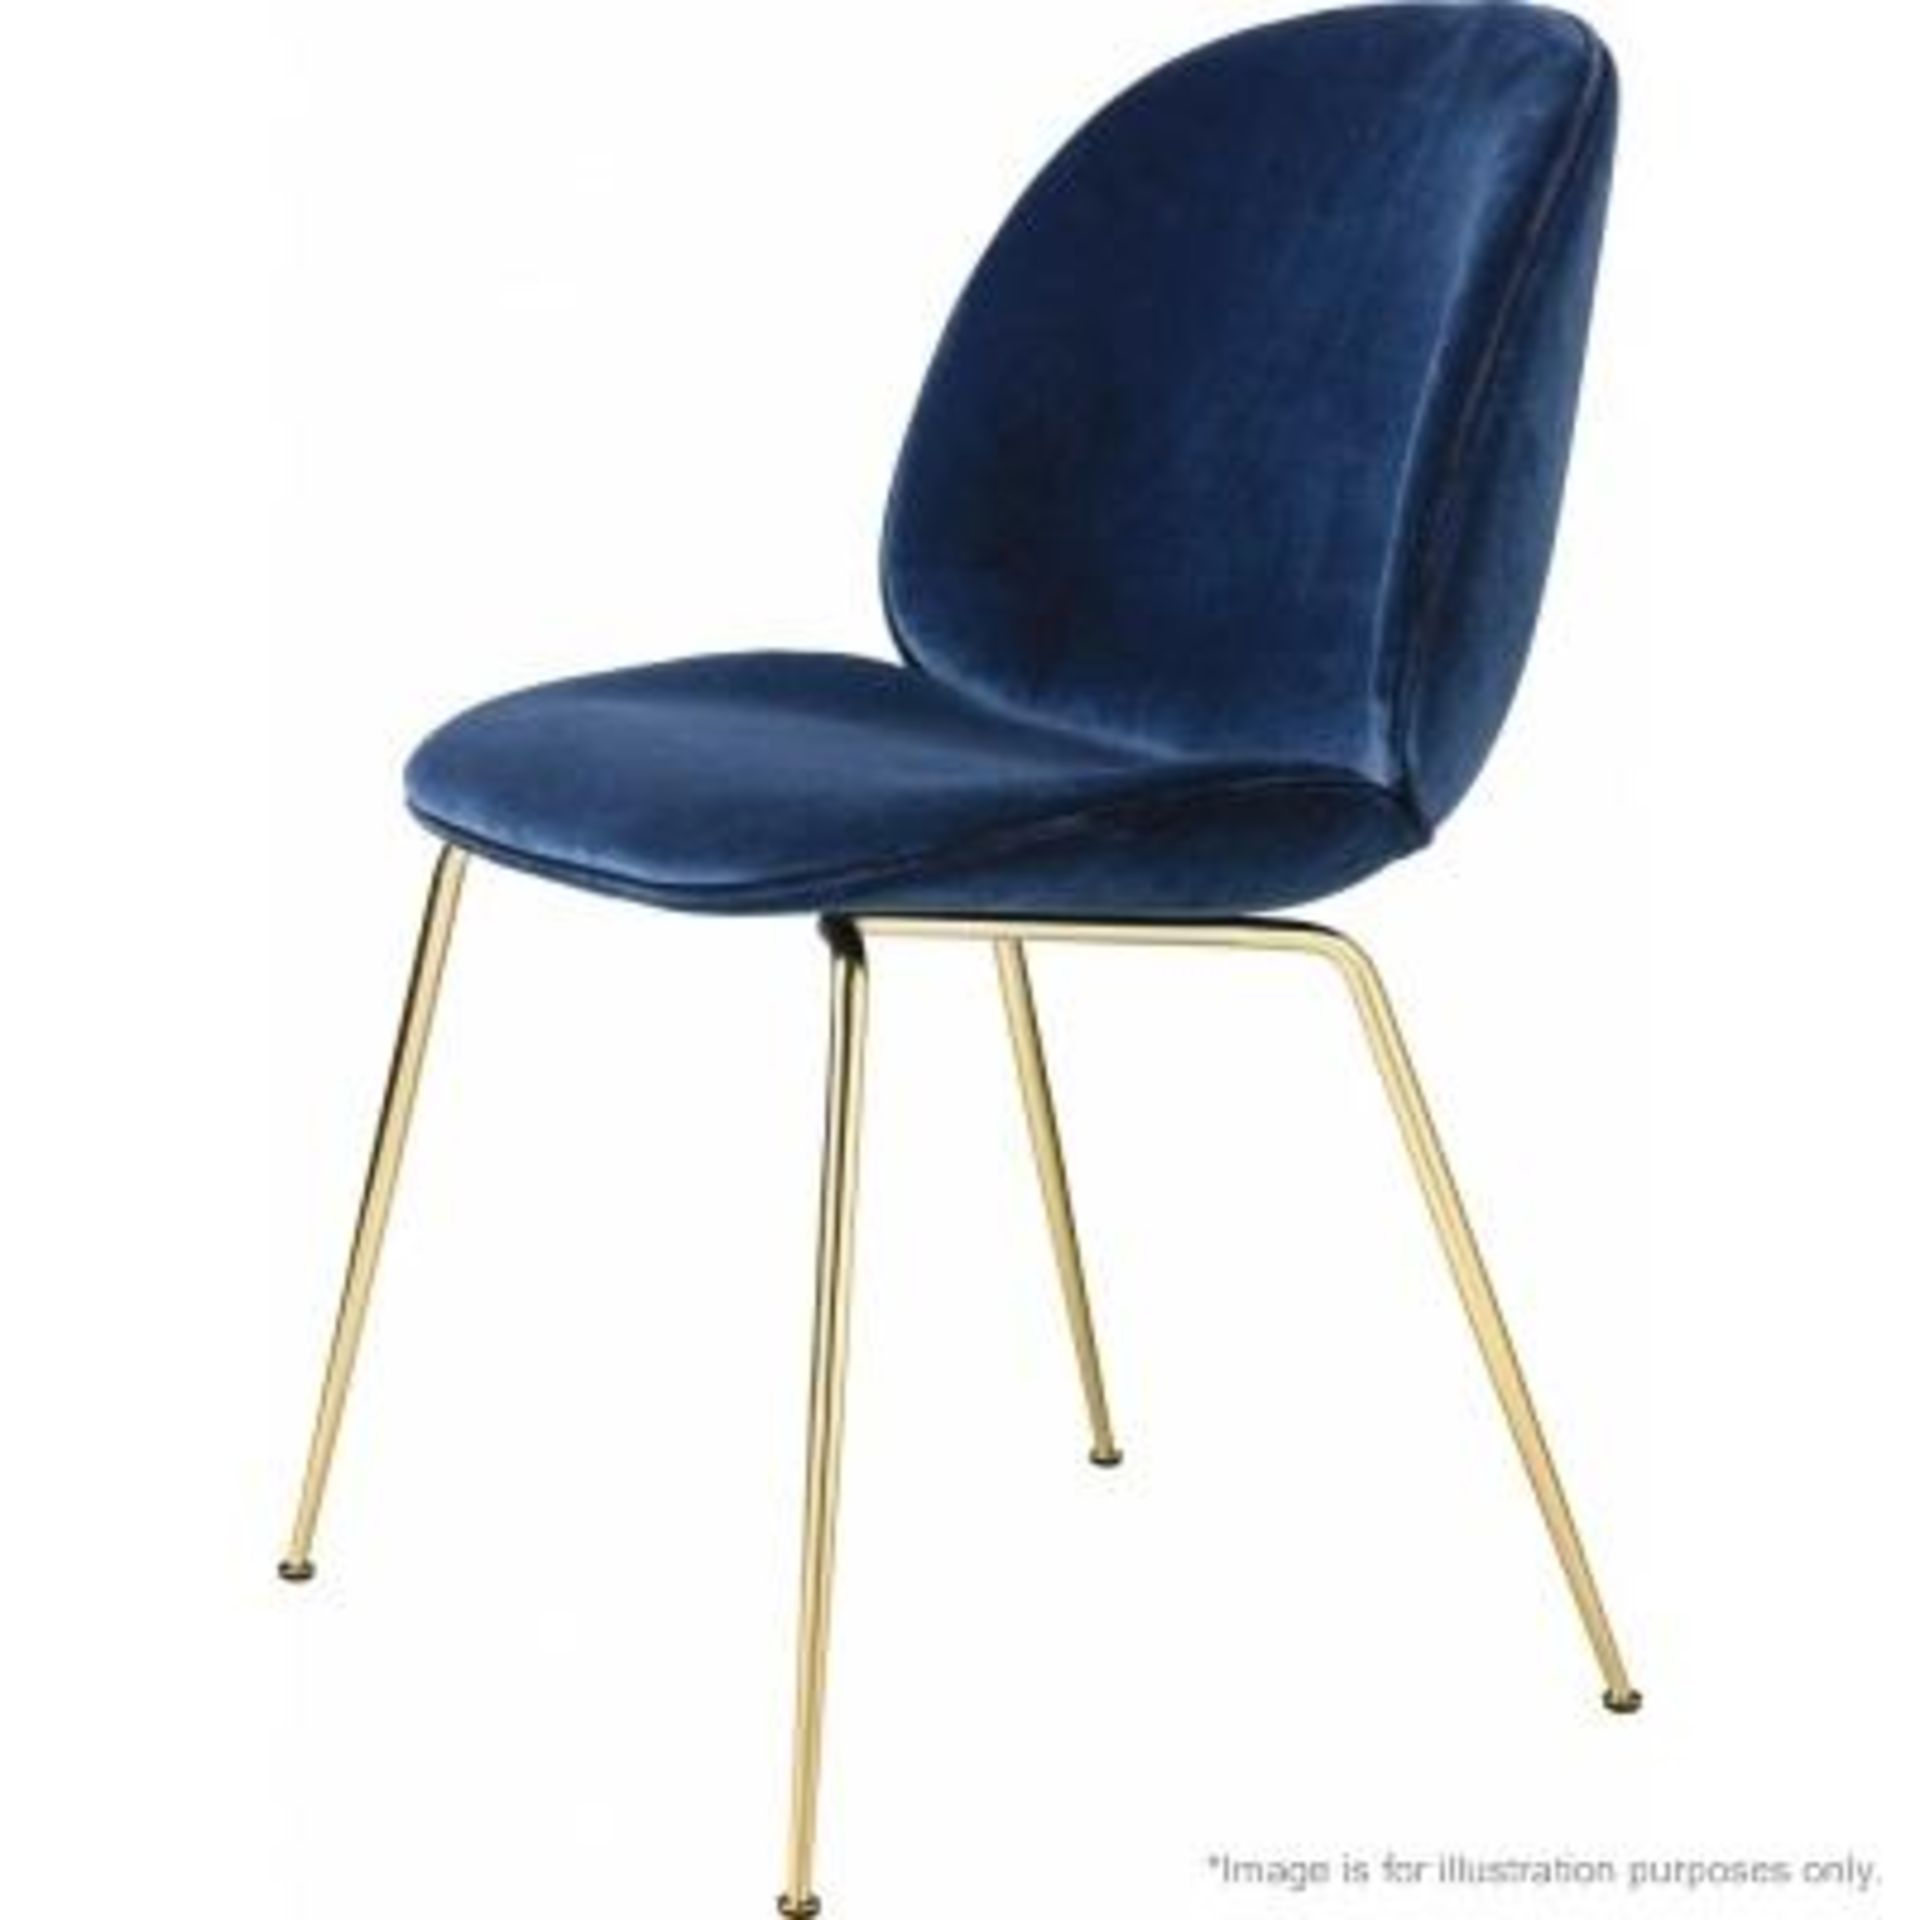 1 x GUBI 'Beetle Chair' - Designed By GamFratesi - Used, Please Read Condition Report - Dimensions: